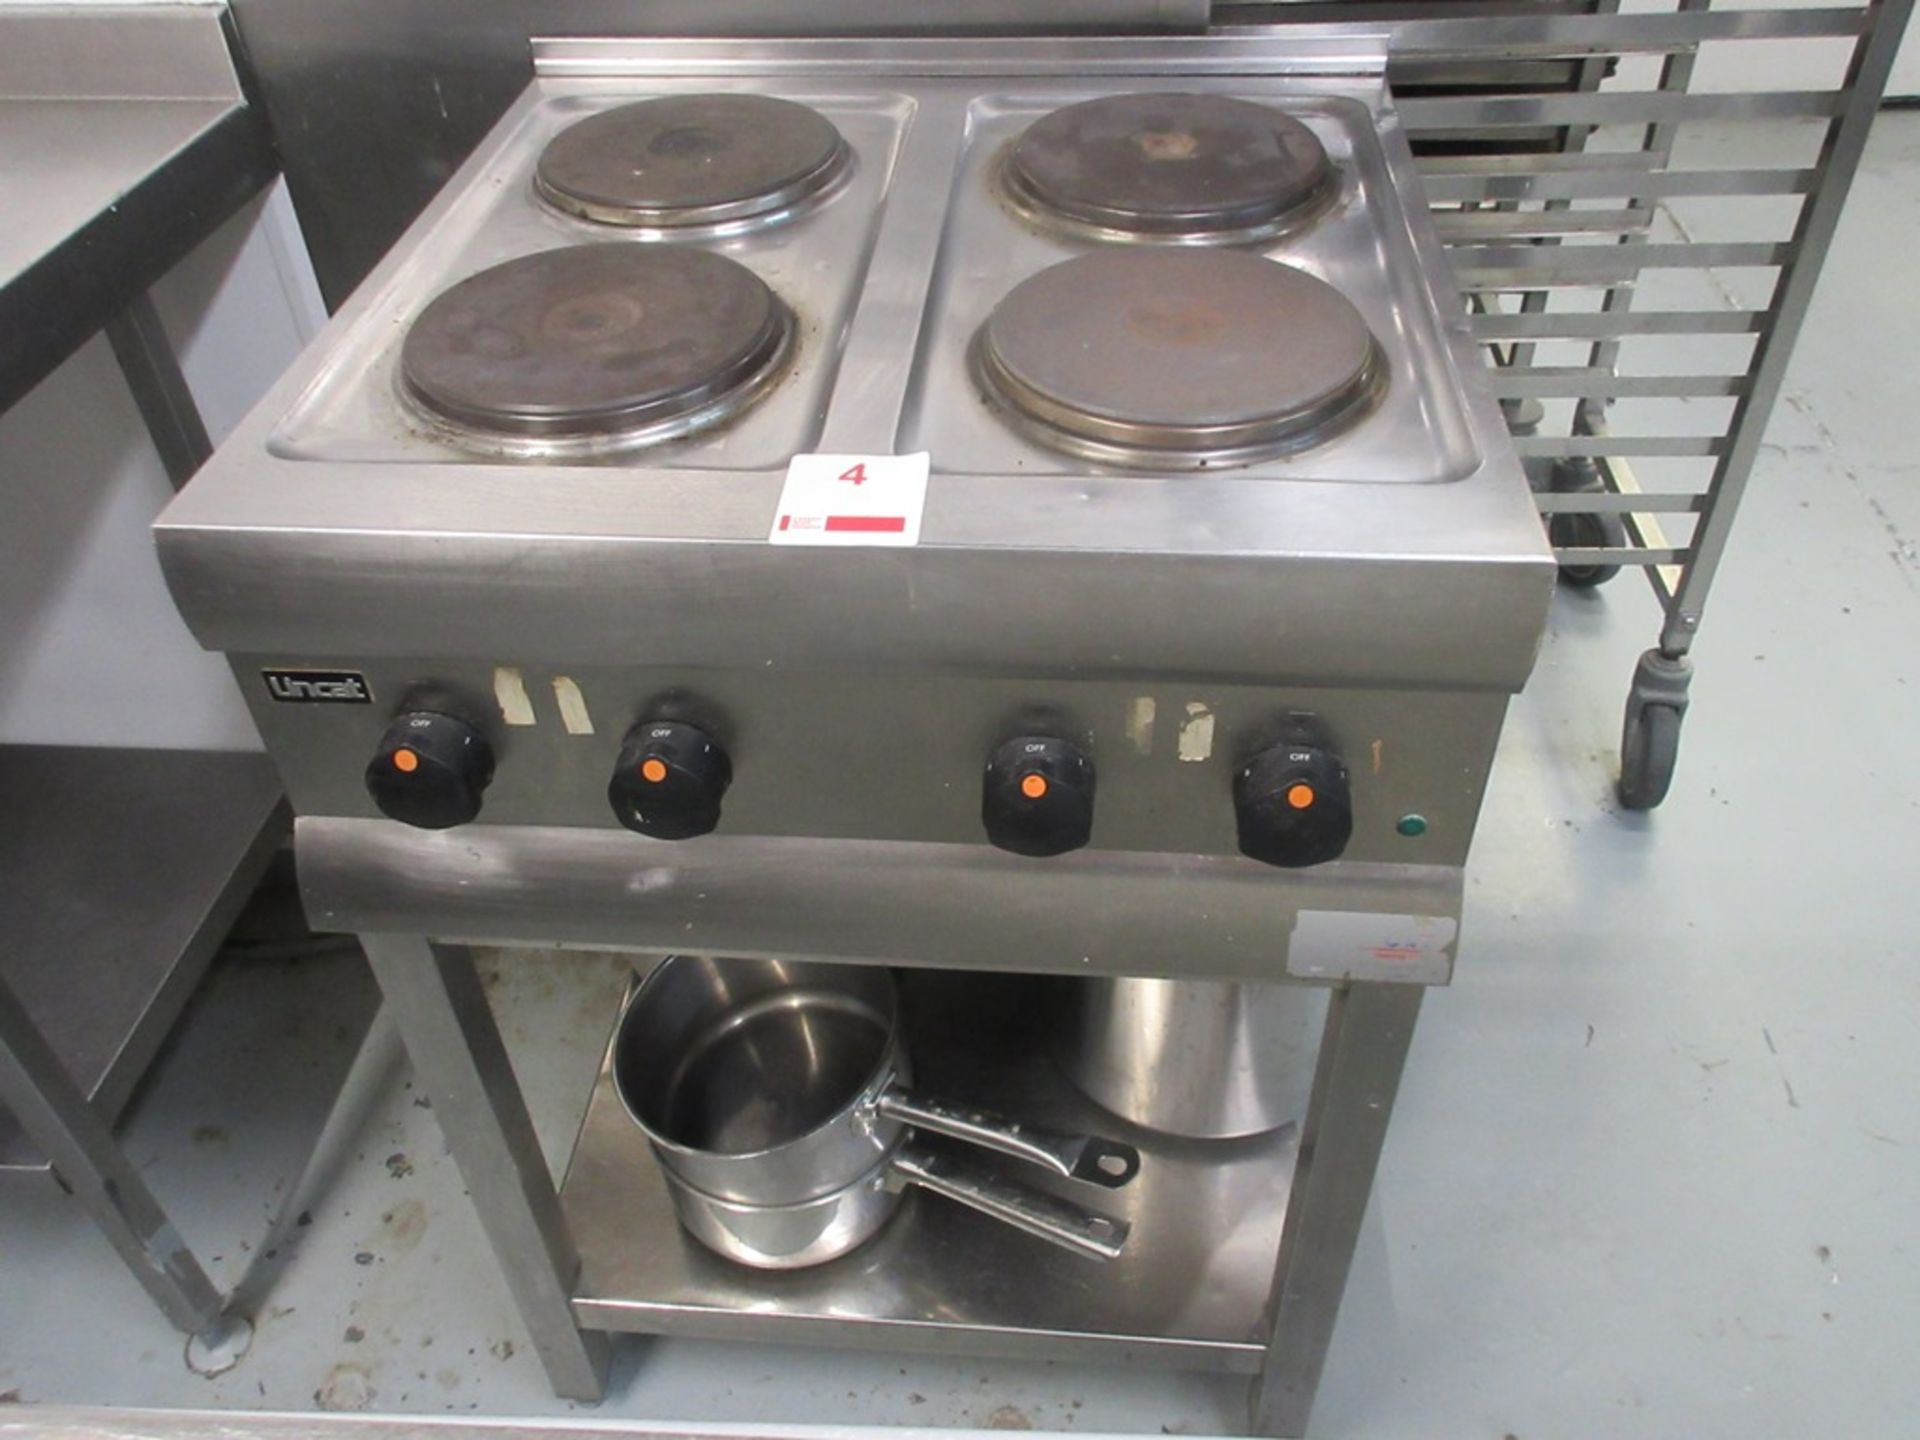 Lincat stainless steel 4 ring electric hob, Model HT6-A003, serial no. 27016630, approx. size: 600mm - Image 3 of 6